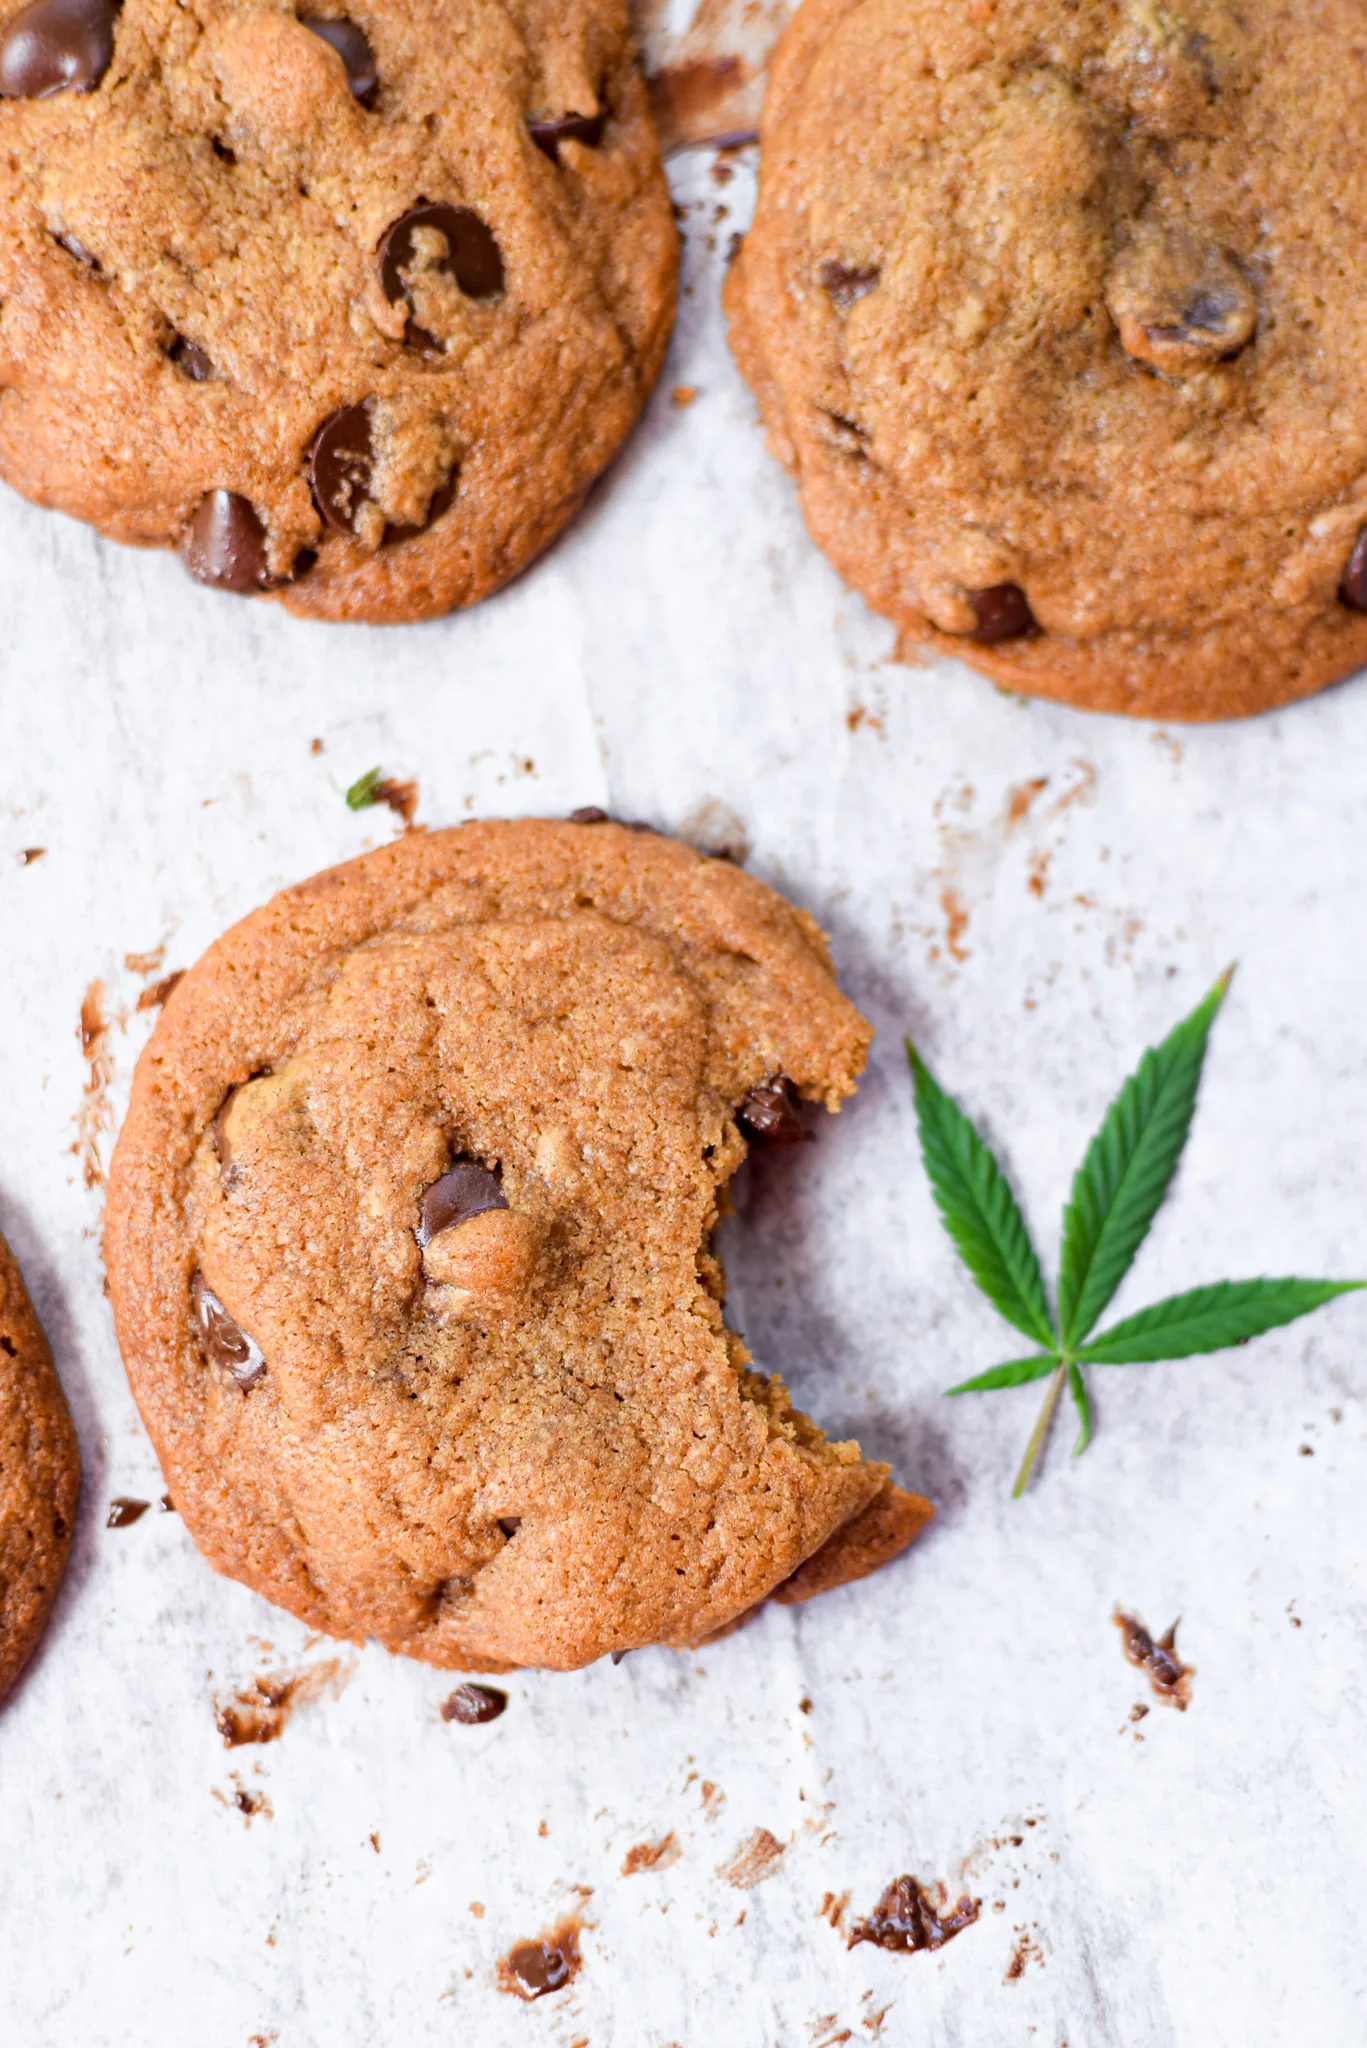 how to make weed cookies